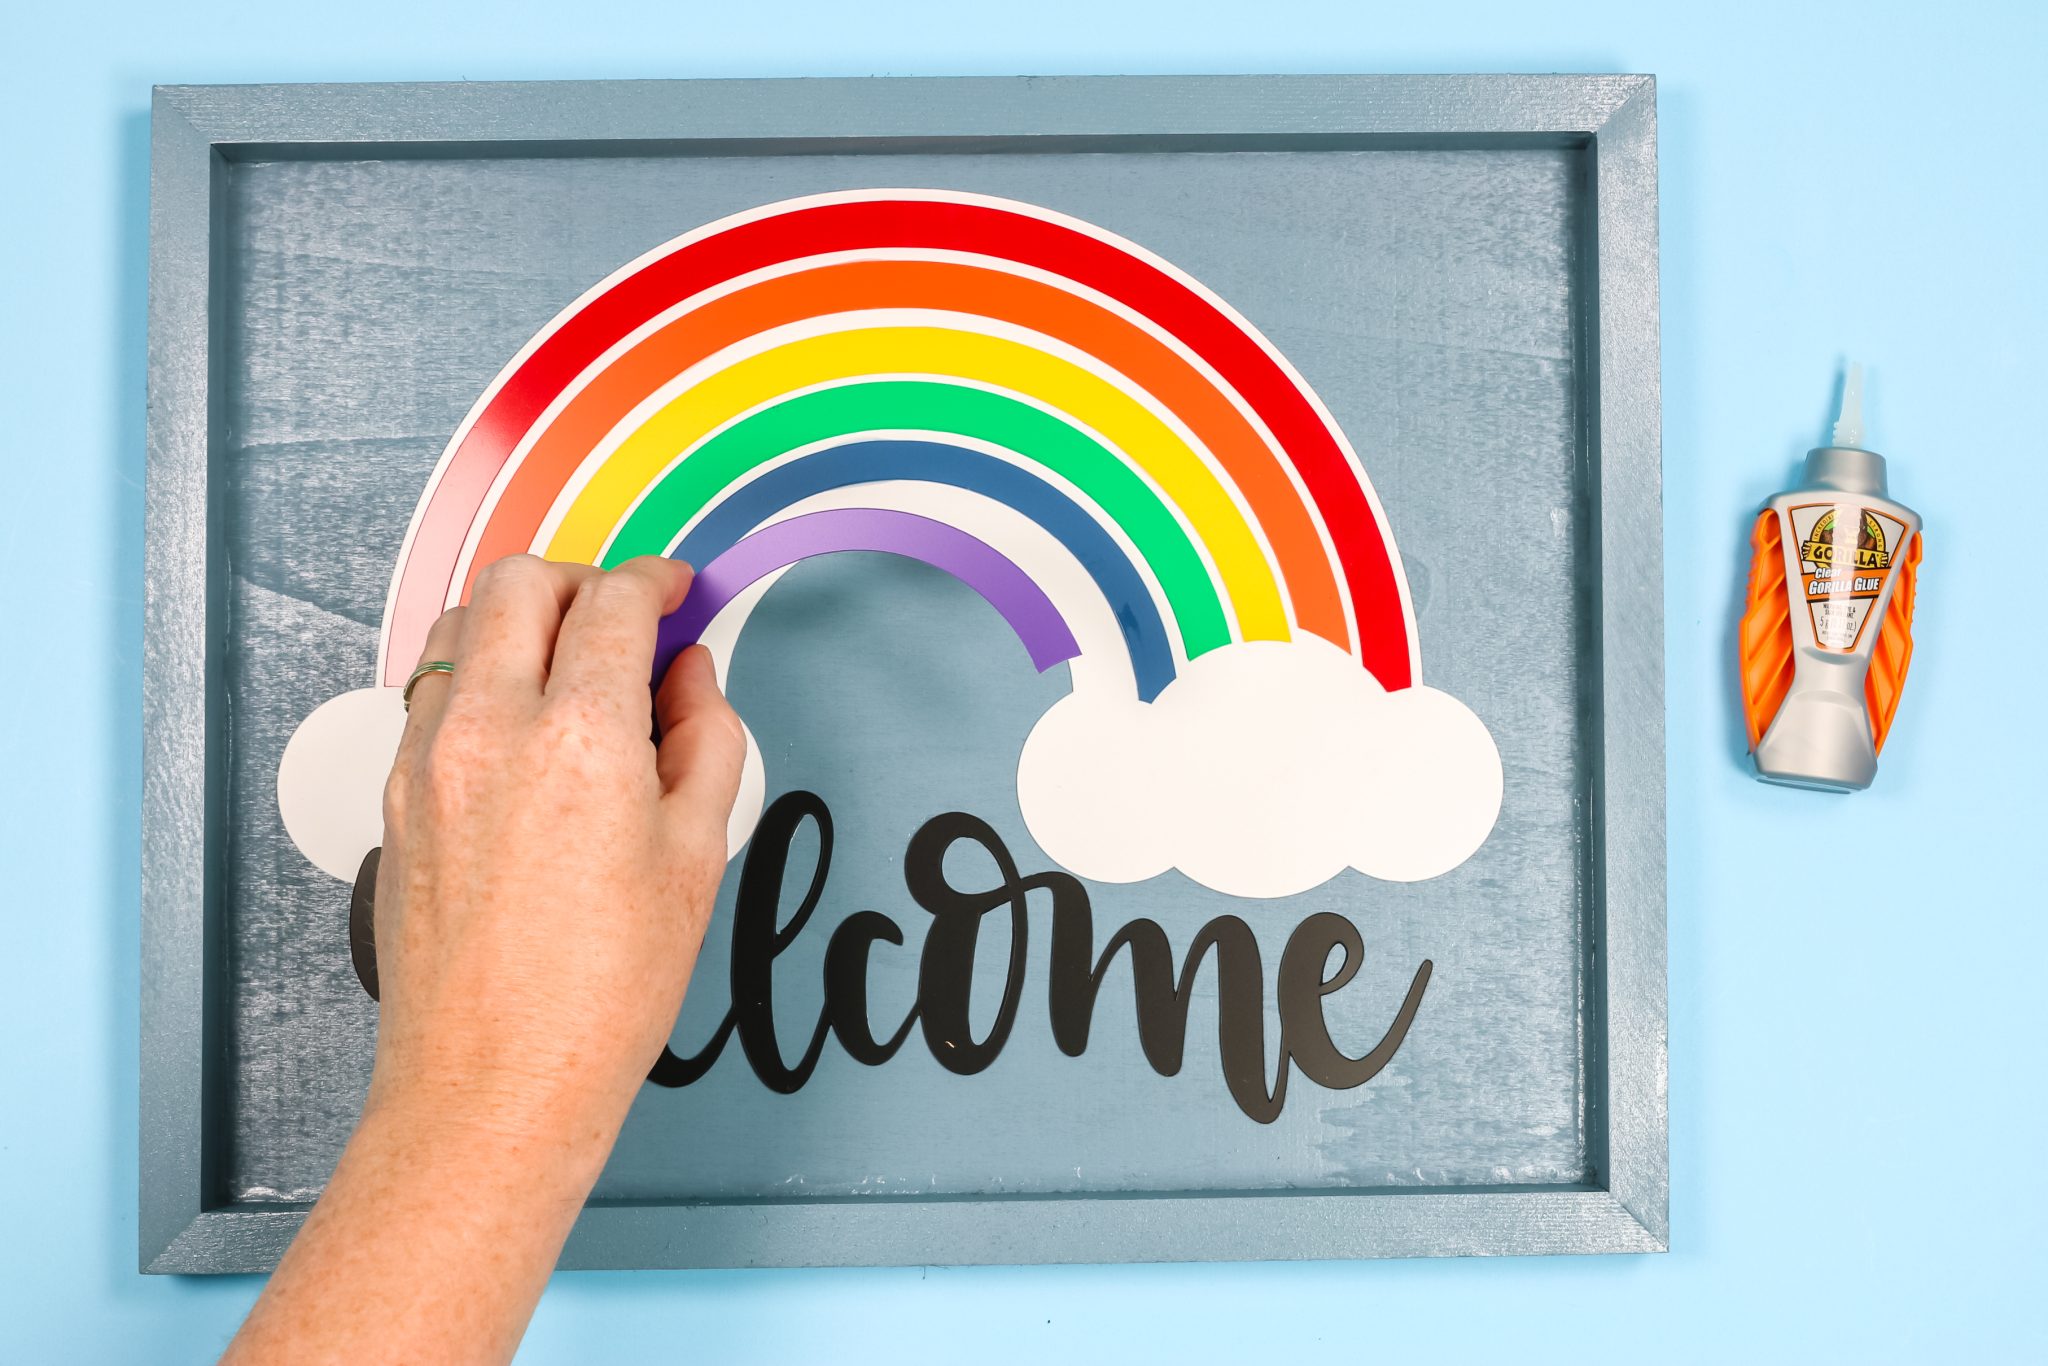 Assemble the rainbow welcome sign.